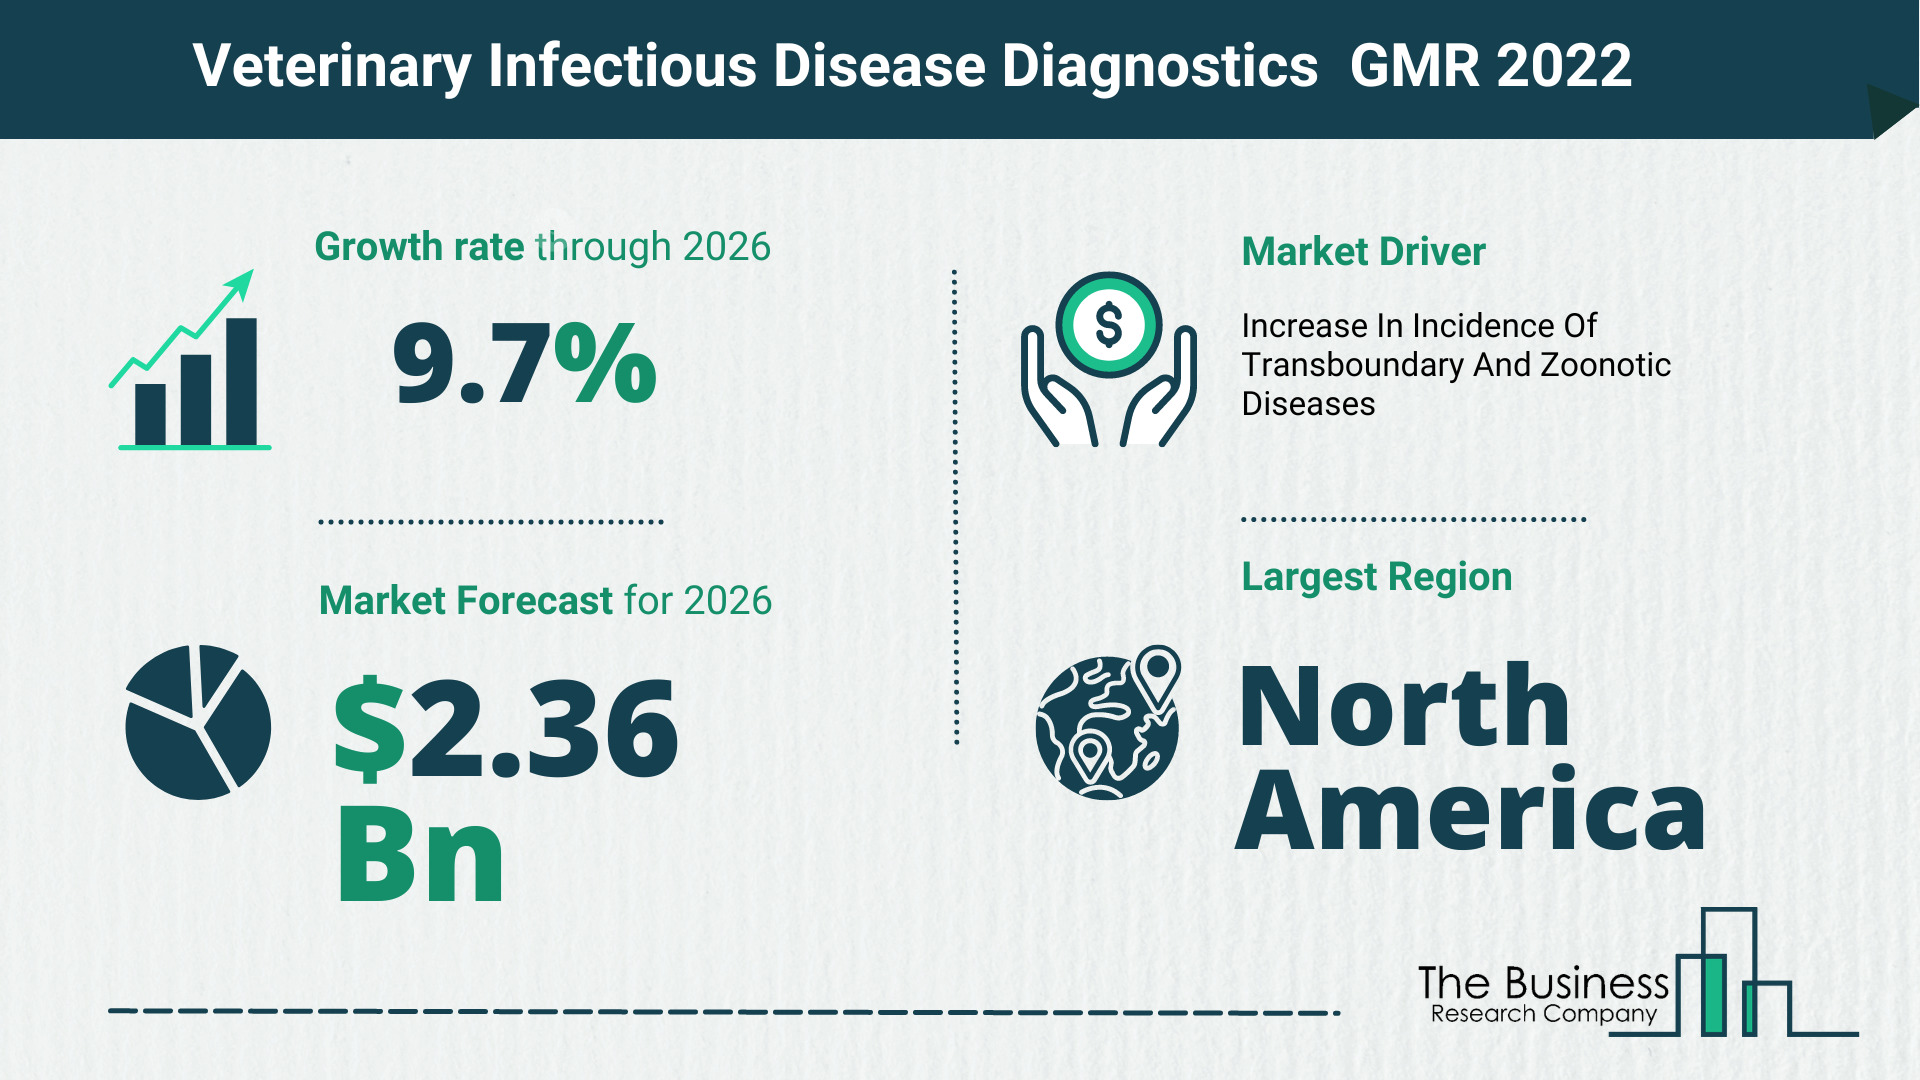 Latest Veterinary Infectious Disease Diagnostics Market Growth Study 2022-2026 By The Business Research Company